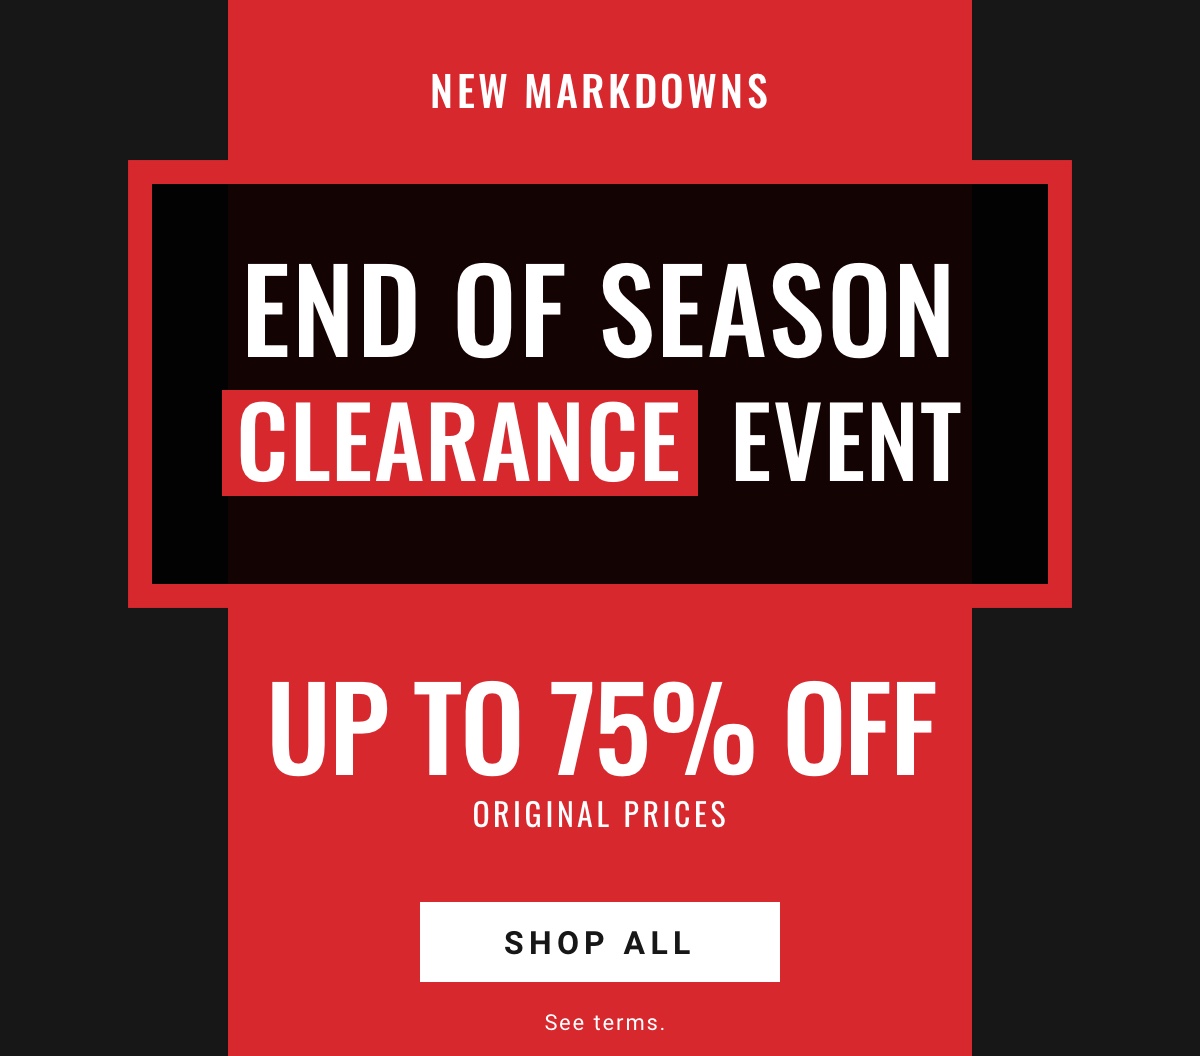 End of Season Clearance Event | Up to 75% Off Original Prices - Shop All